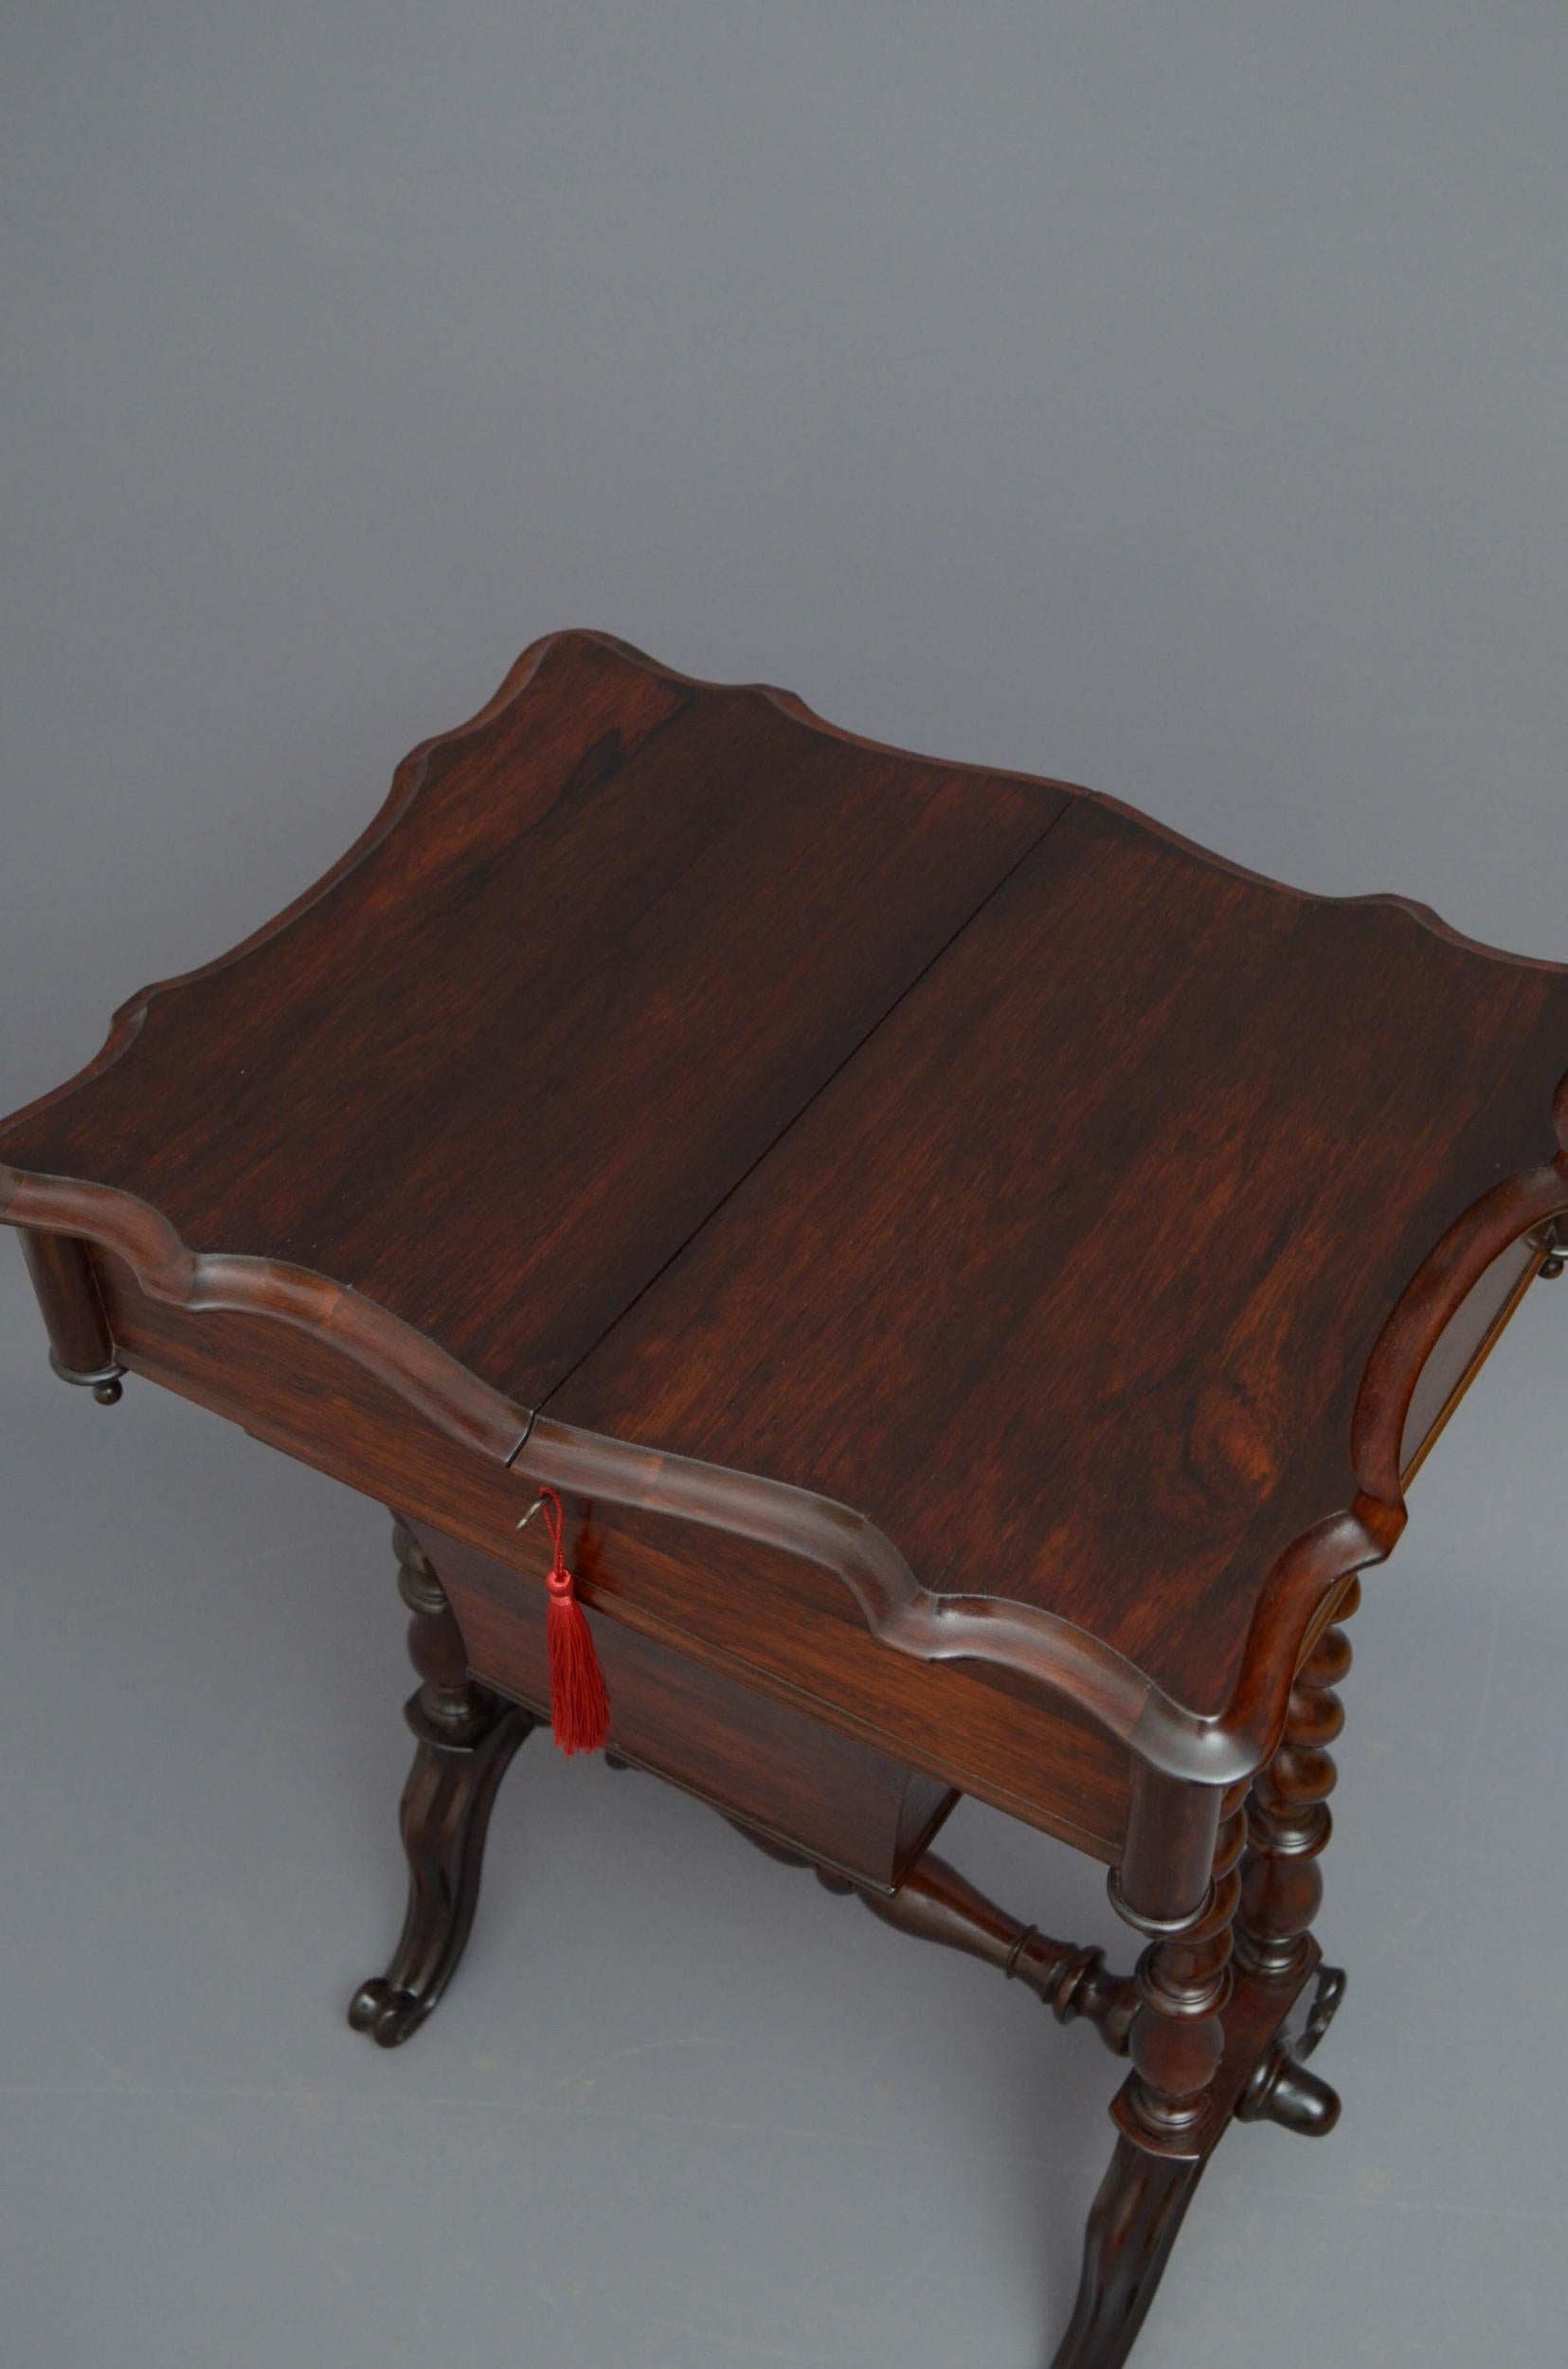 Victorian Rosewood Work Table In Good Condition For Sale In Whaley Bridge, GB